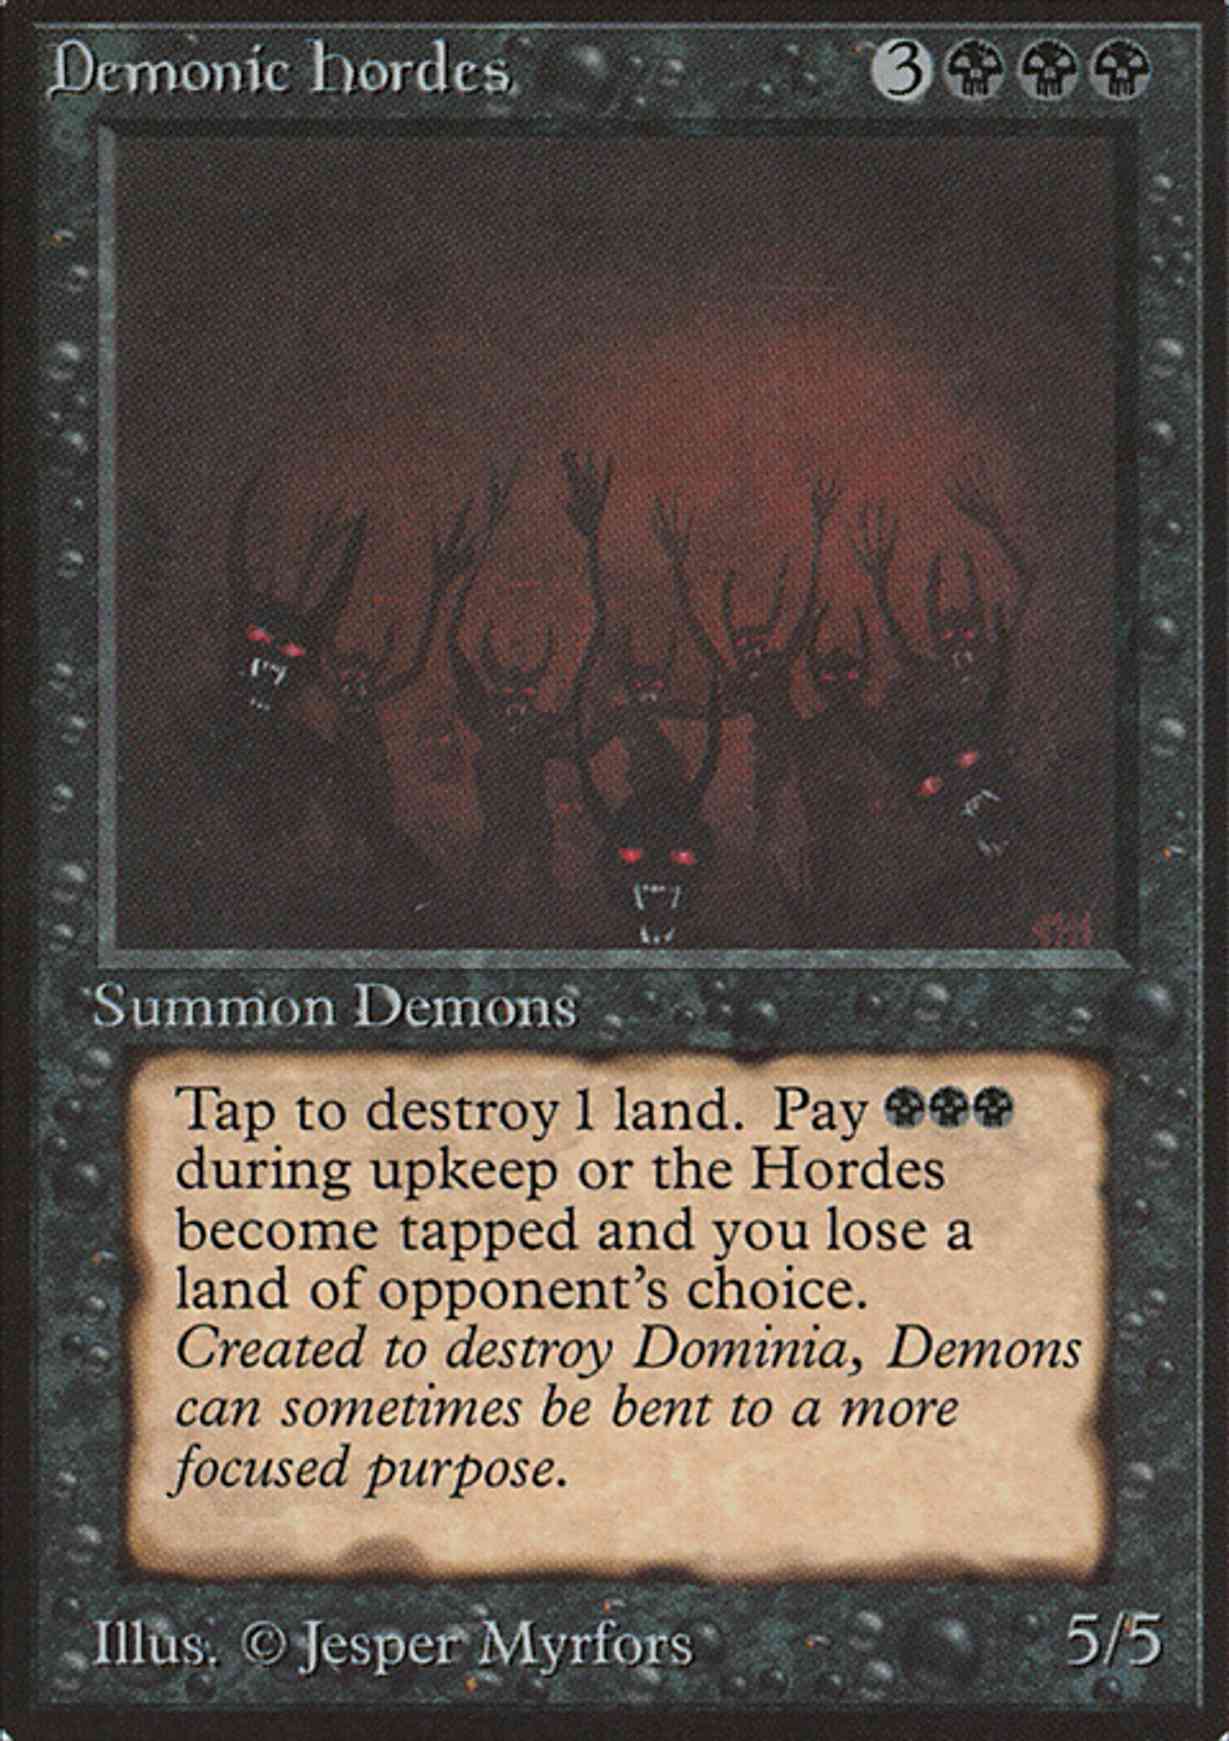 Demonic Hordes Price from mtg Limited Edition Beta